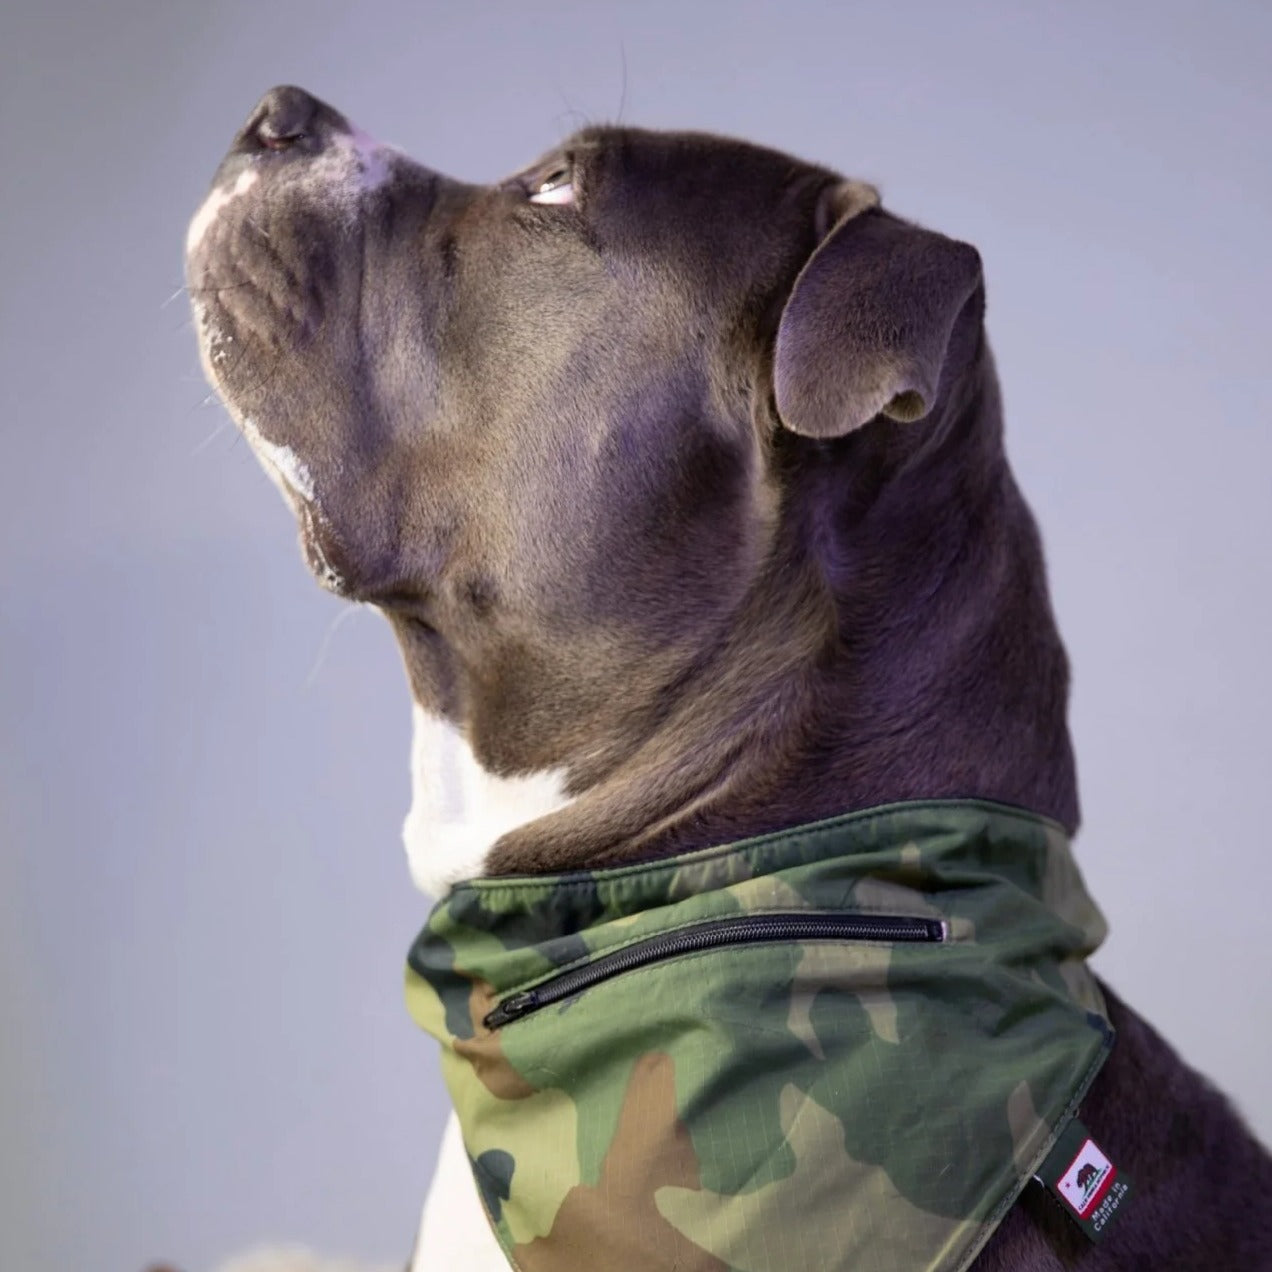 A dog wearing a sustainable pet product.